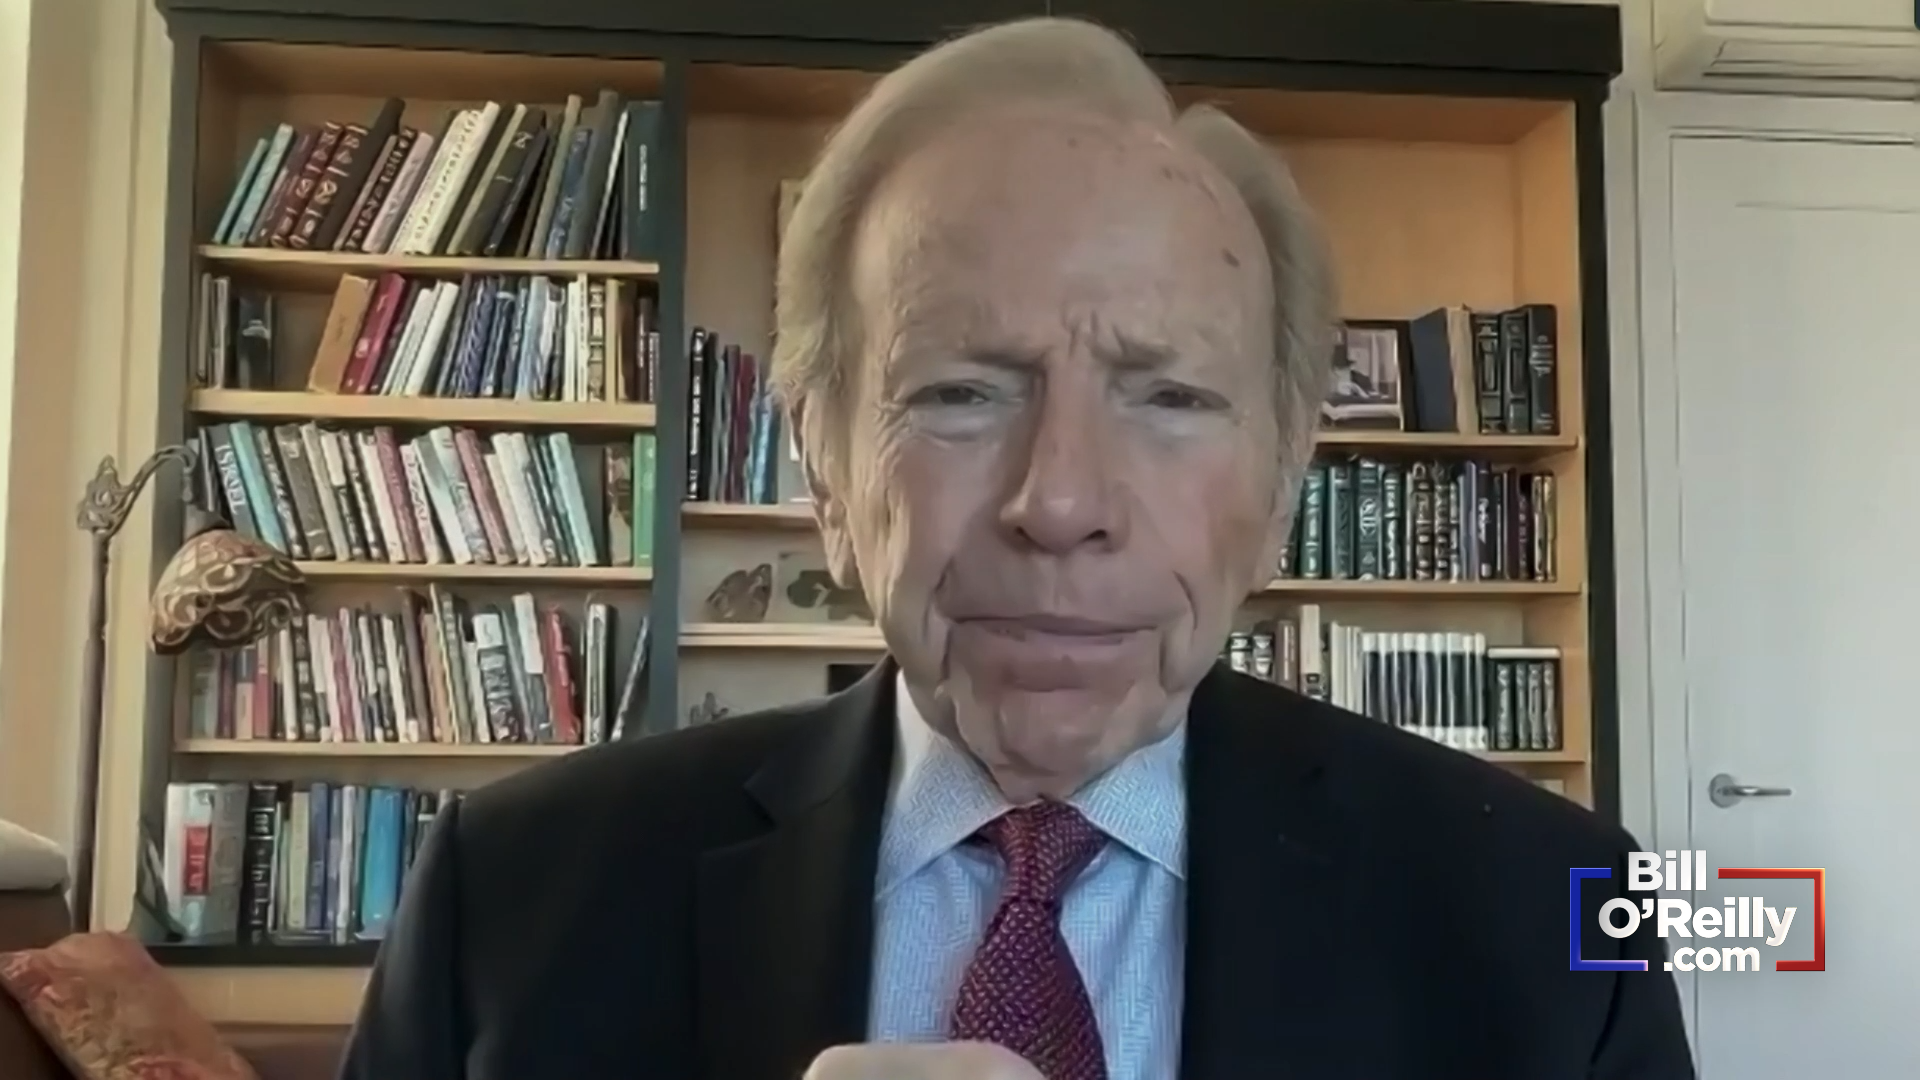 Lieberman on Voting: 'I'm Shocked They're Still Counting Votes'